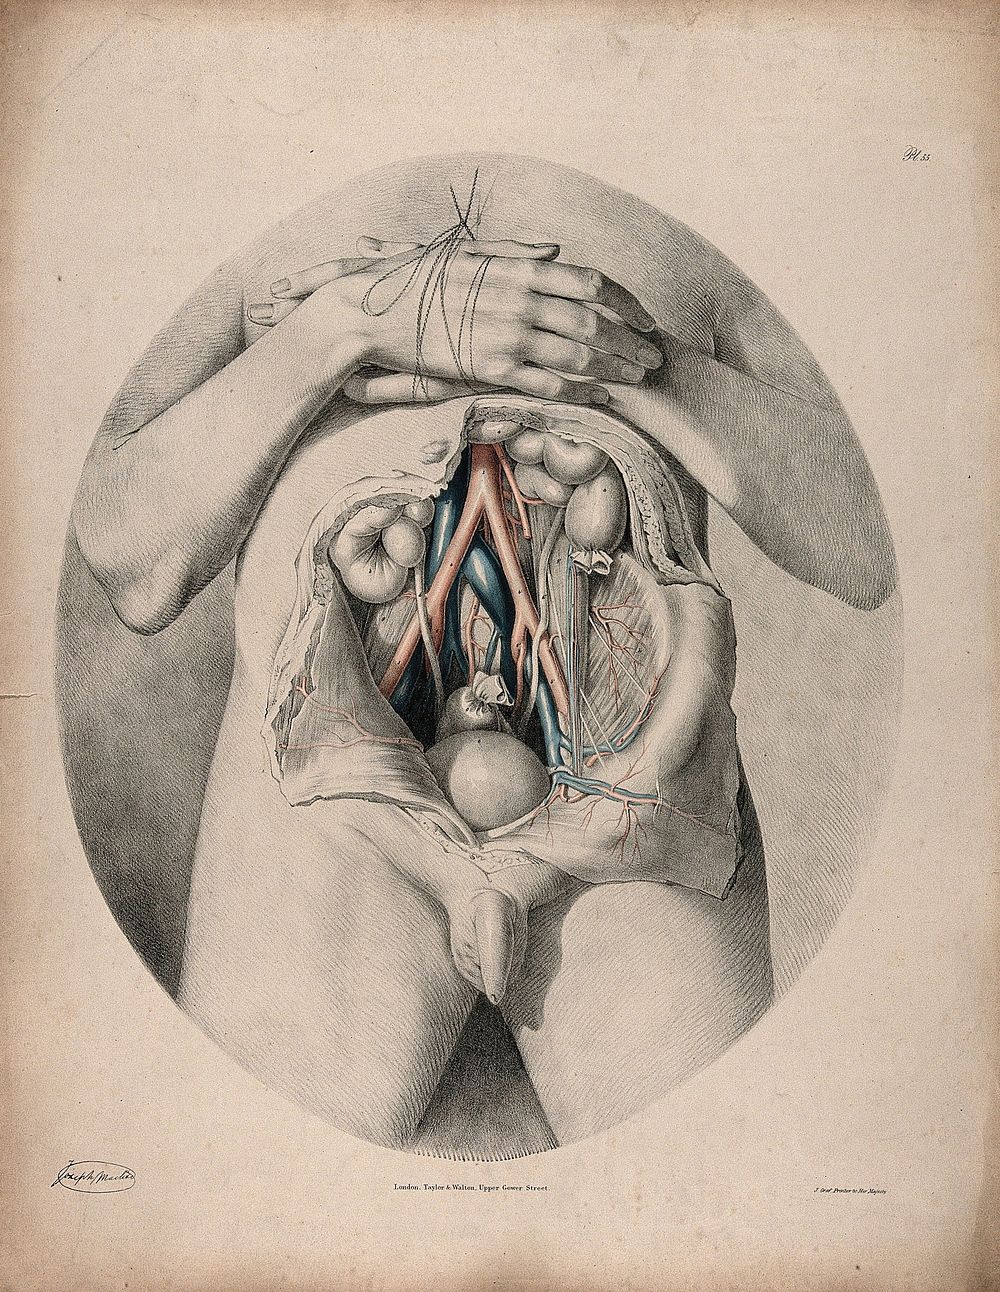 The circulatory system: dissection of the abdomen showing the intestines and bladder, with the arteries and veins indicated…